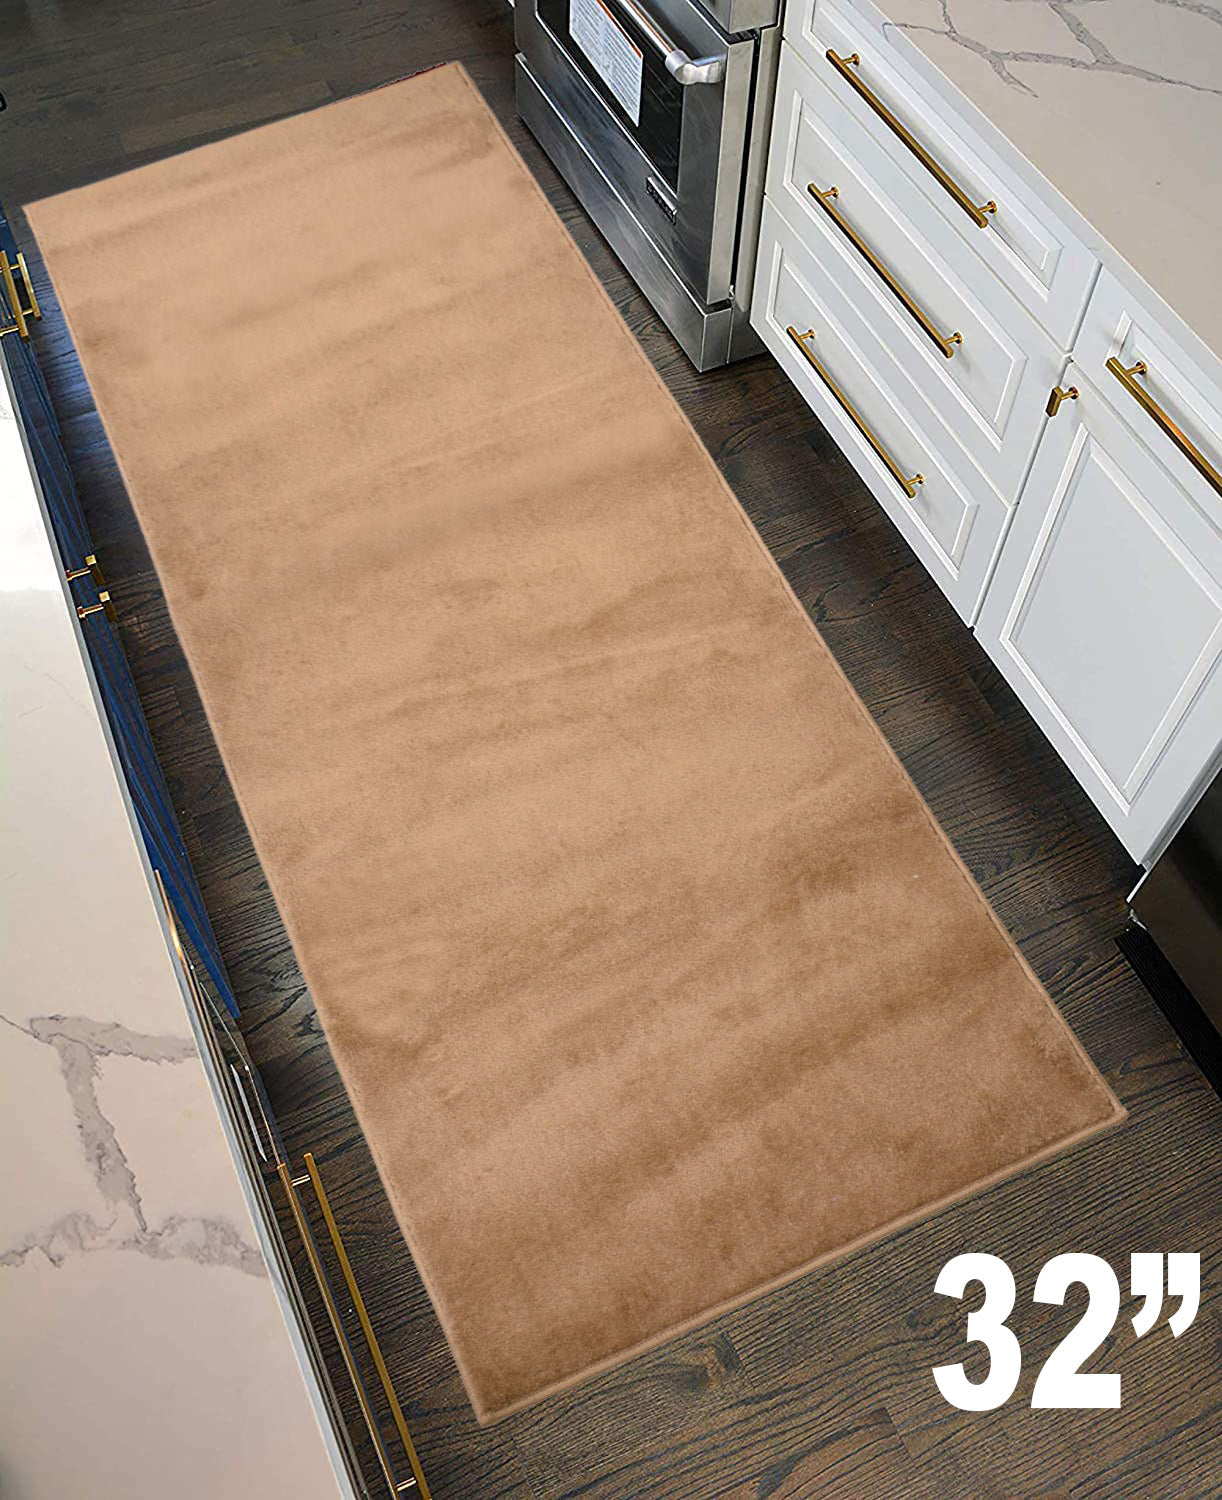 Machine Washable Custom Size Runner Rug Solid Beige Color Skid Resistant Rug Runner Customize Up to 50 Feet and 30 Inch Width Runner Rug